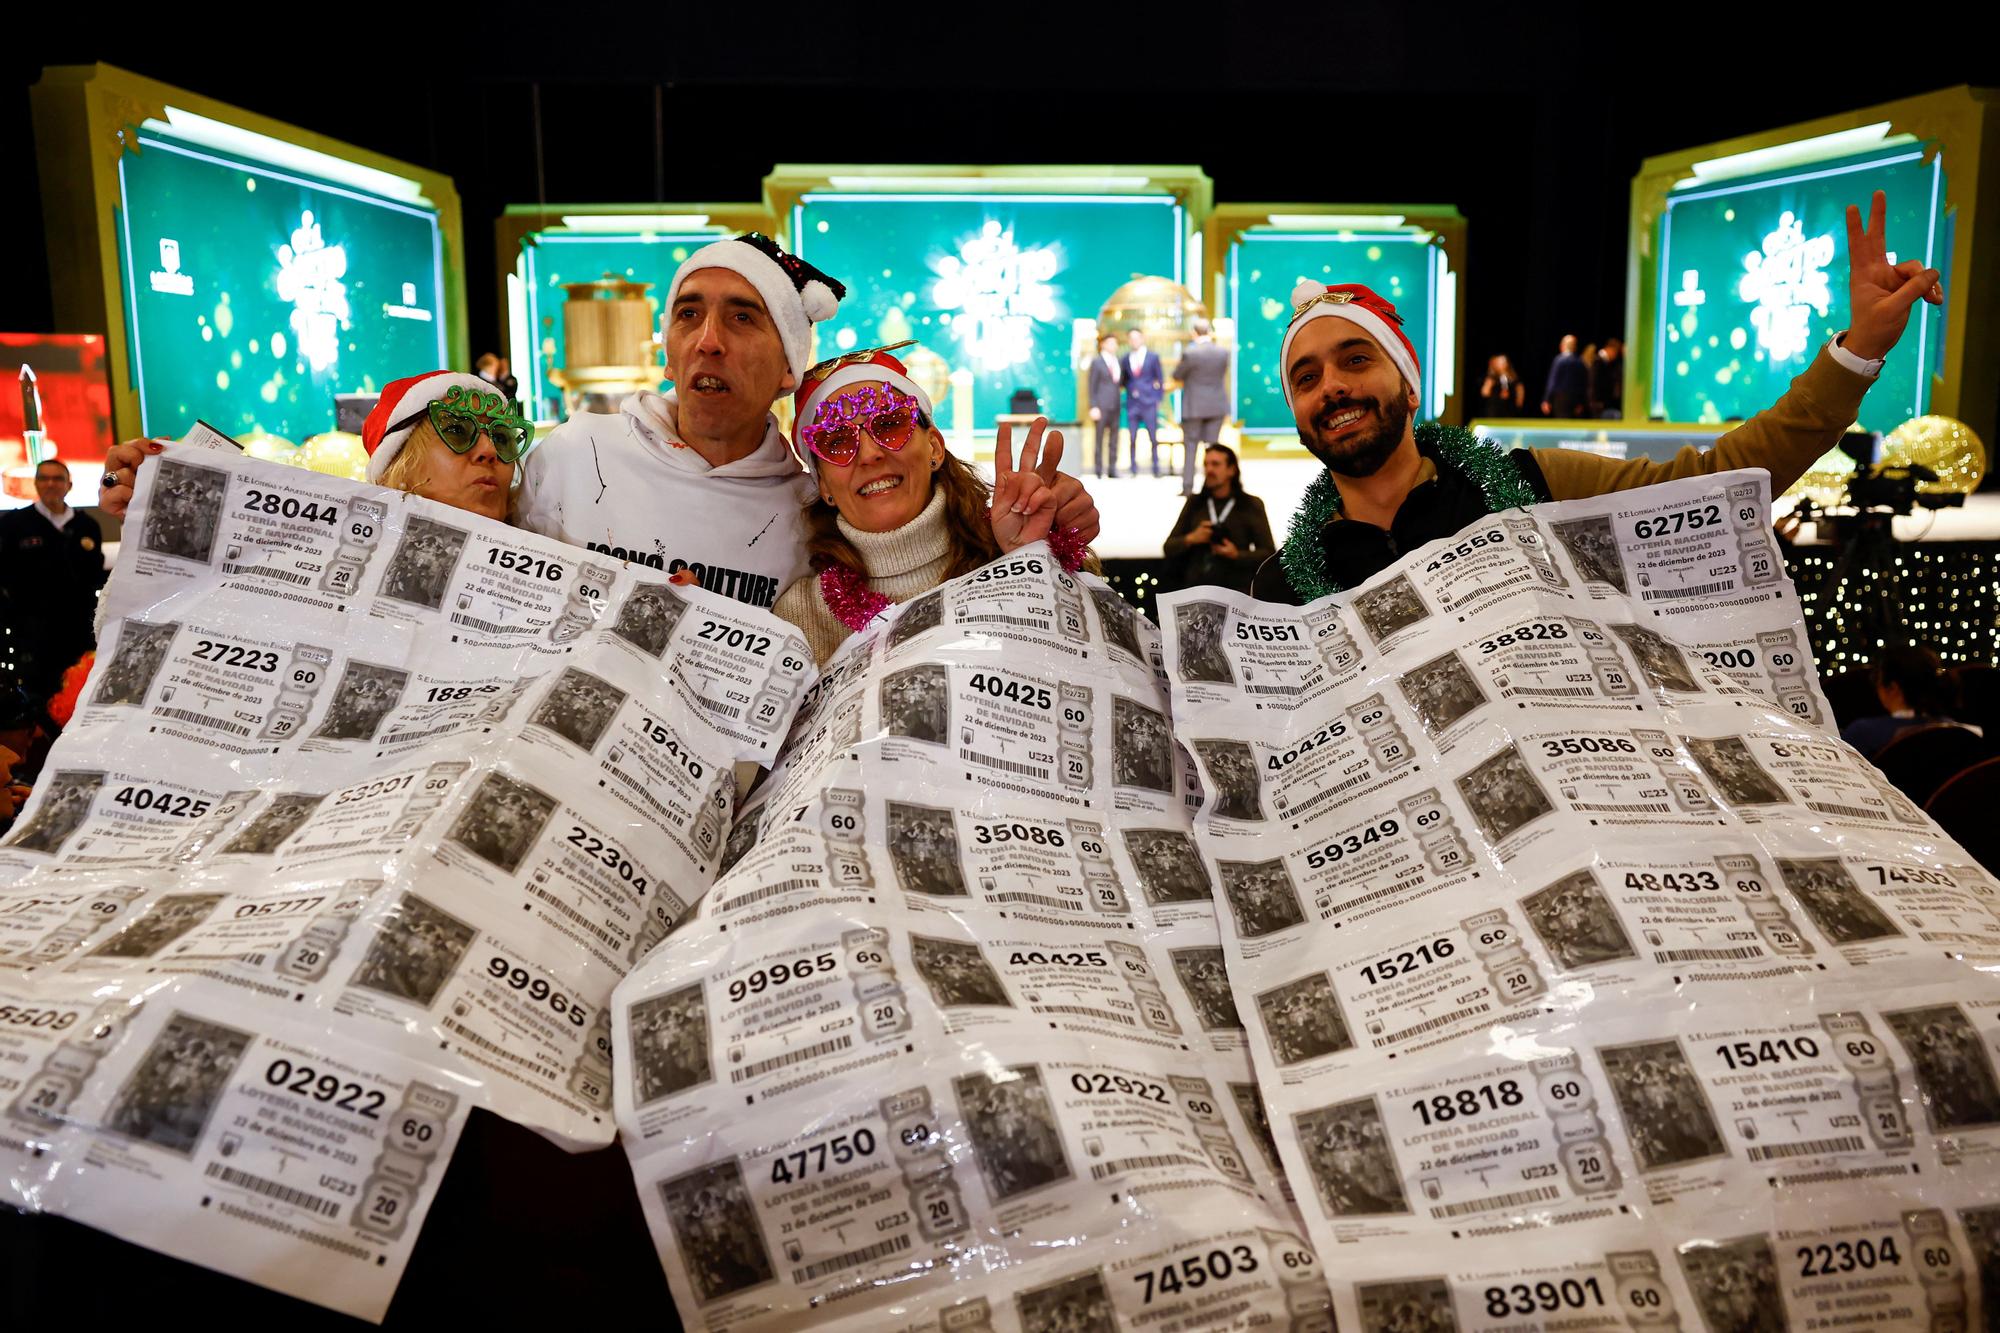 Christmas lottery "El Gordo" (The Fat One) in Madrid